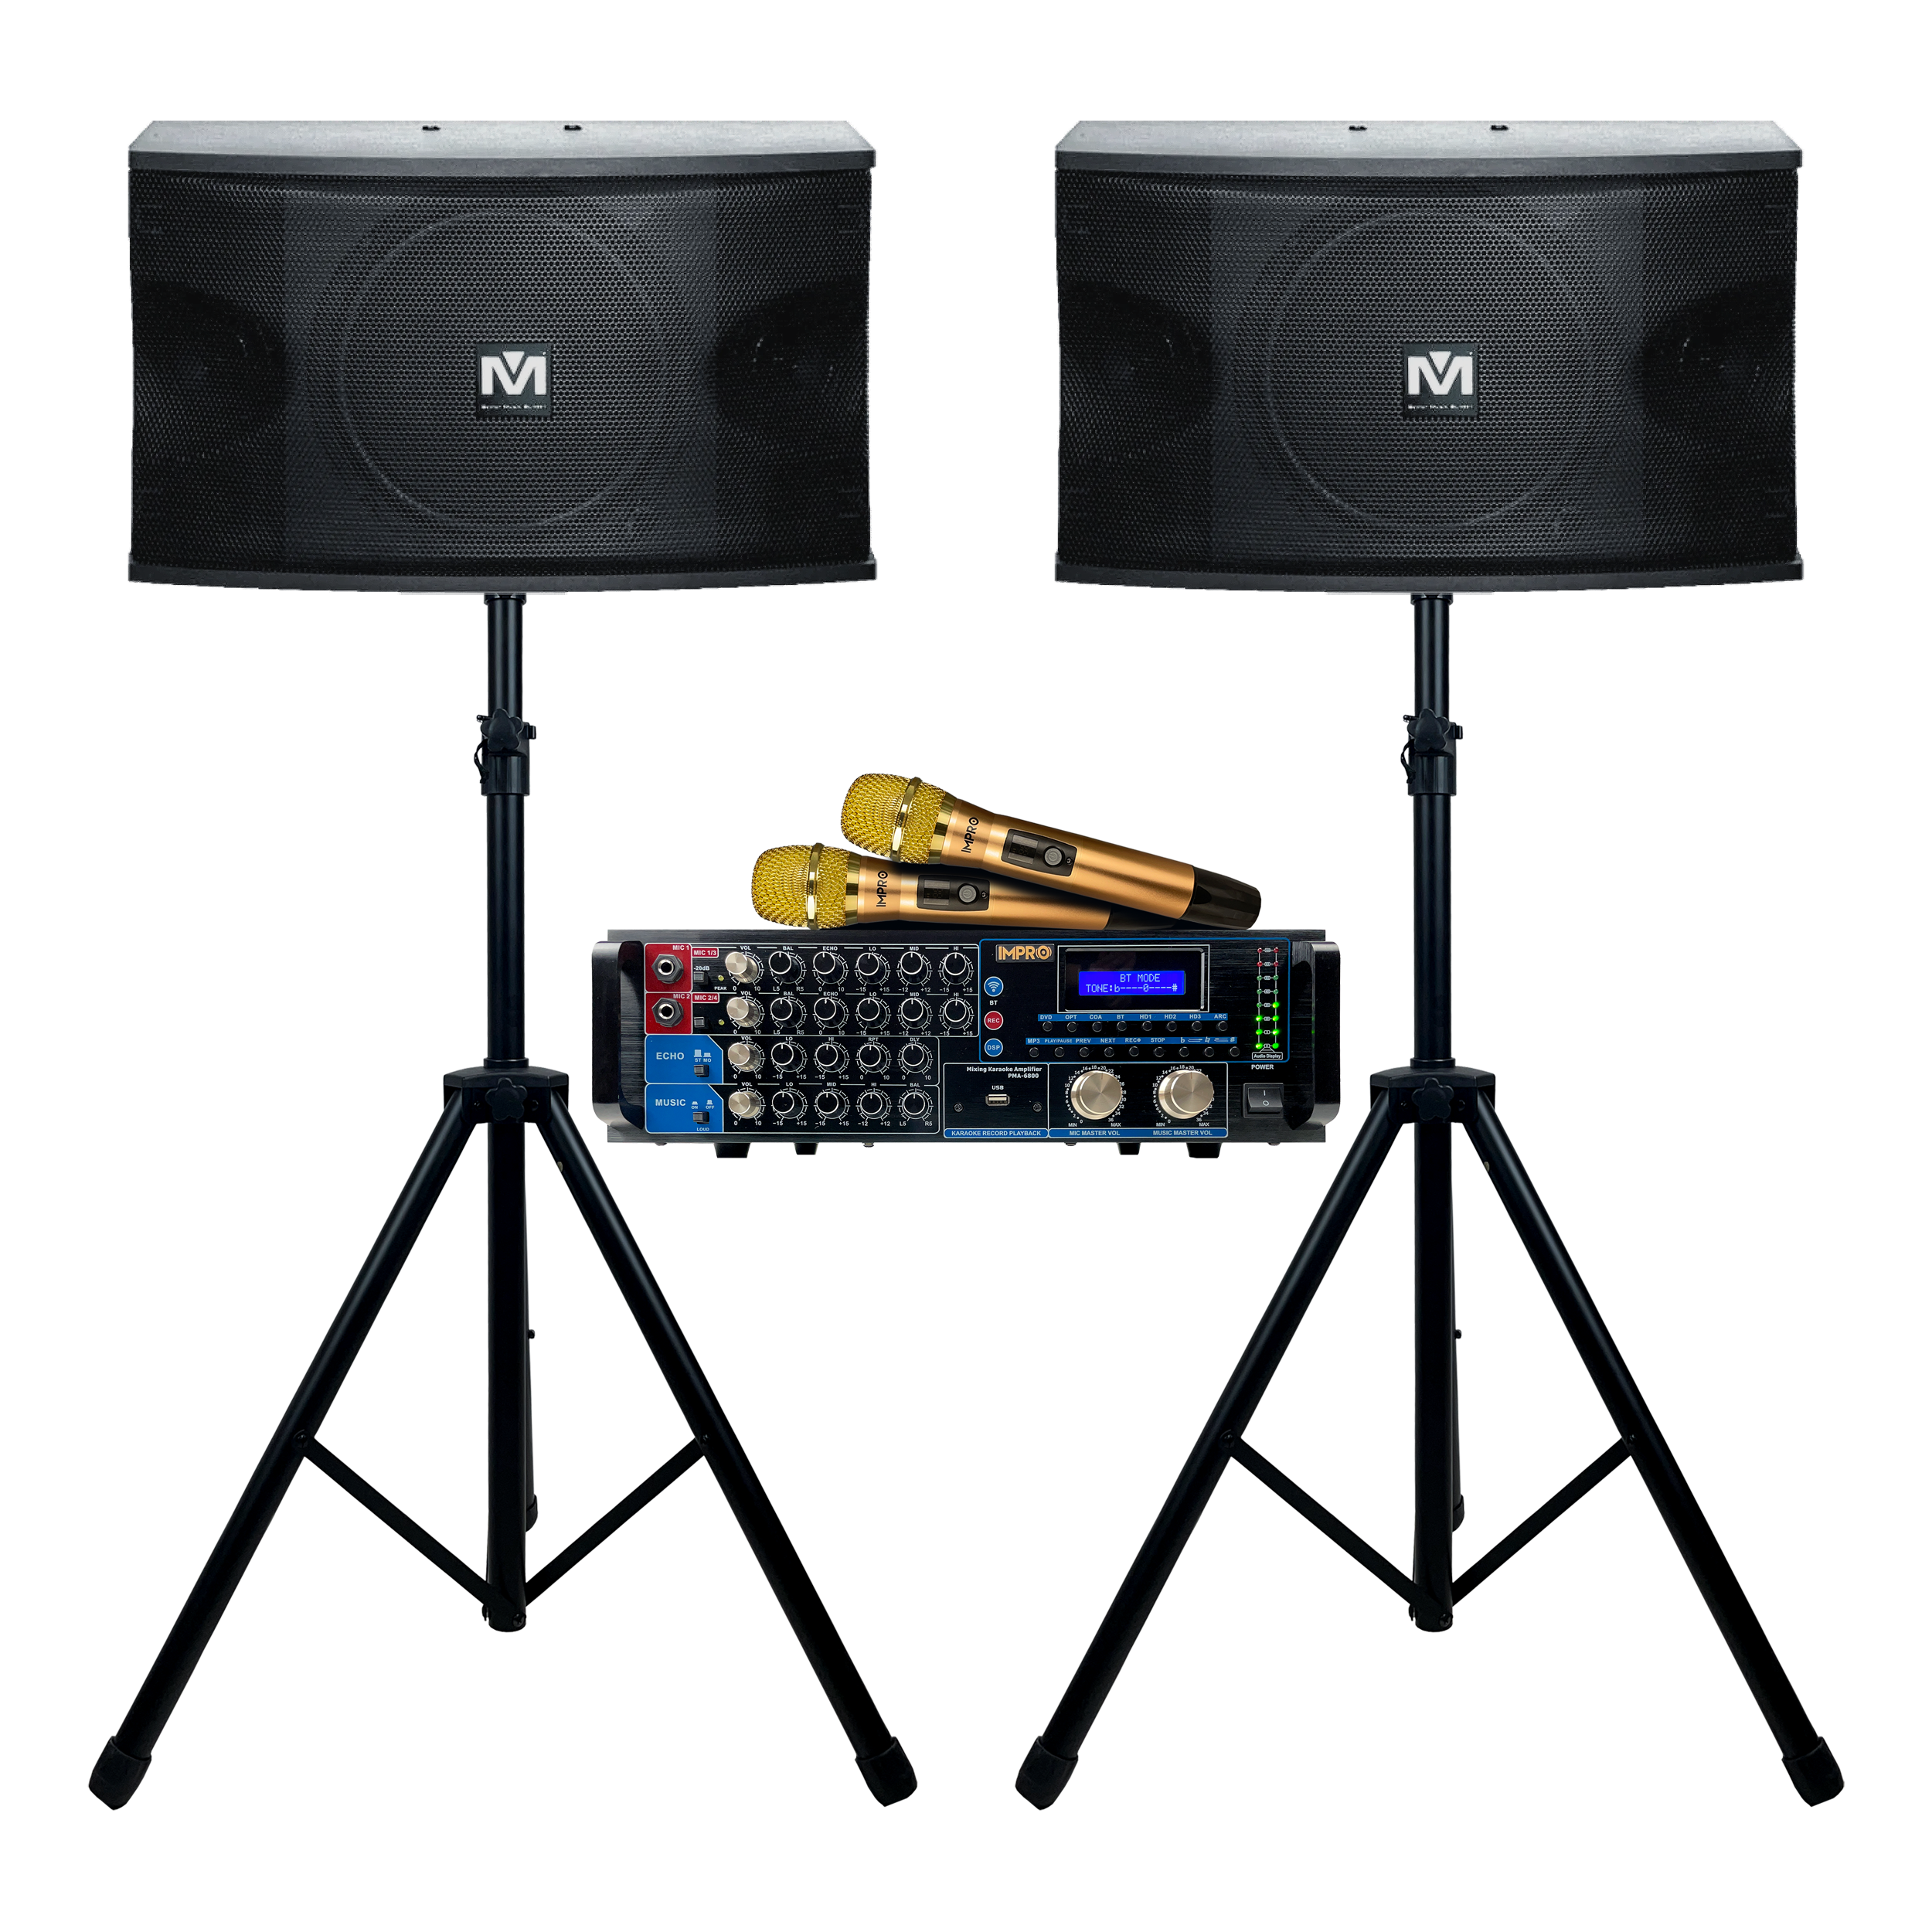 Holiday Encore Bundle 2: Mixing Amplifier, Speakers, Microphones, and Accessories (4 items)